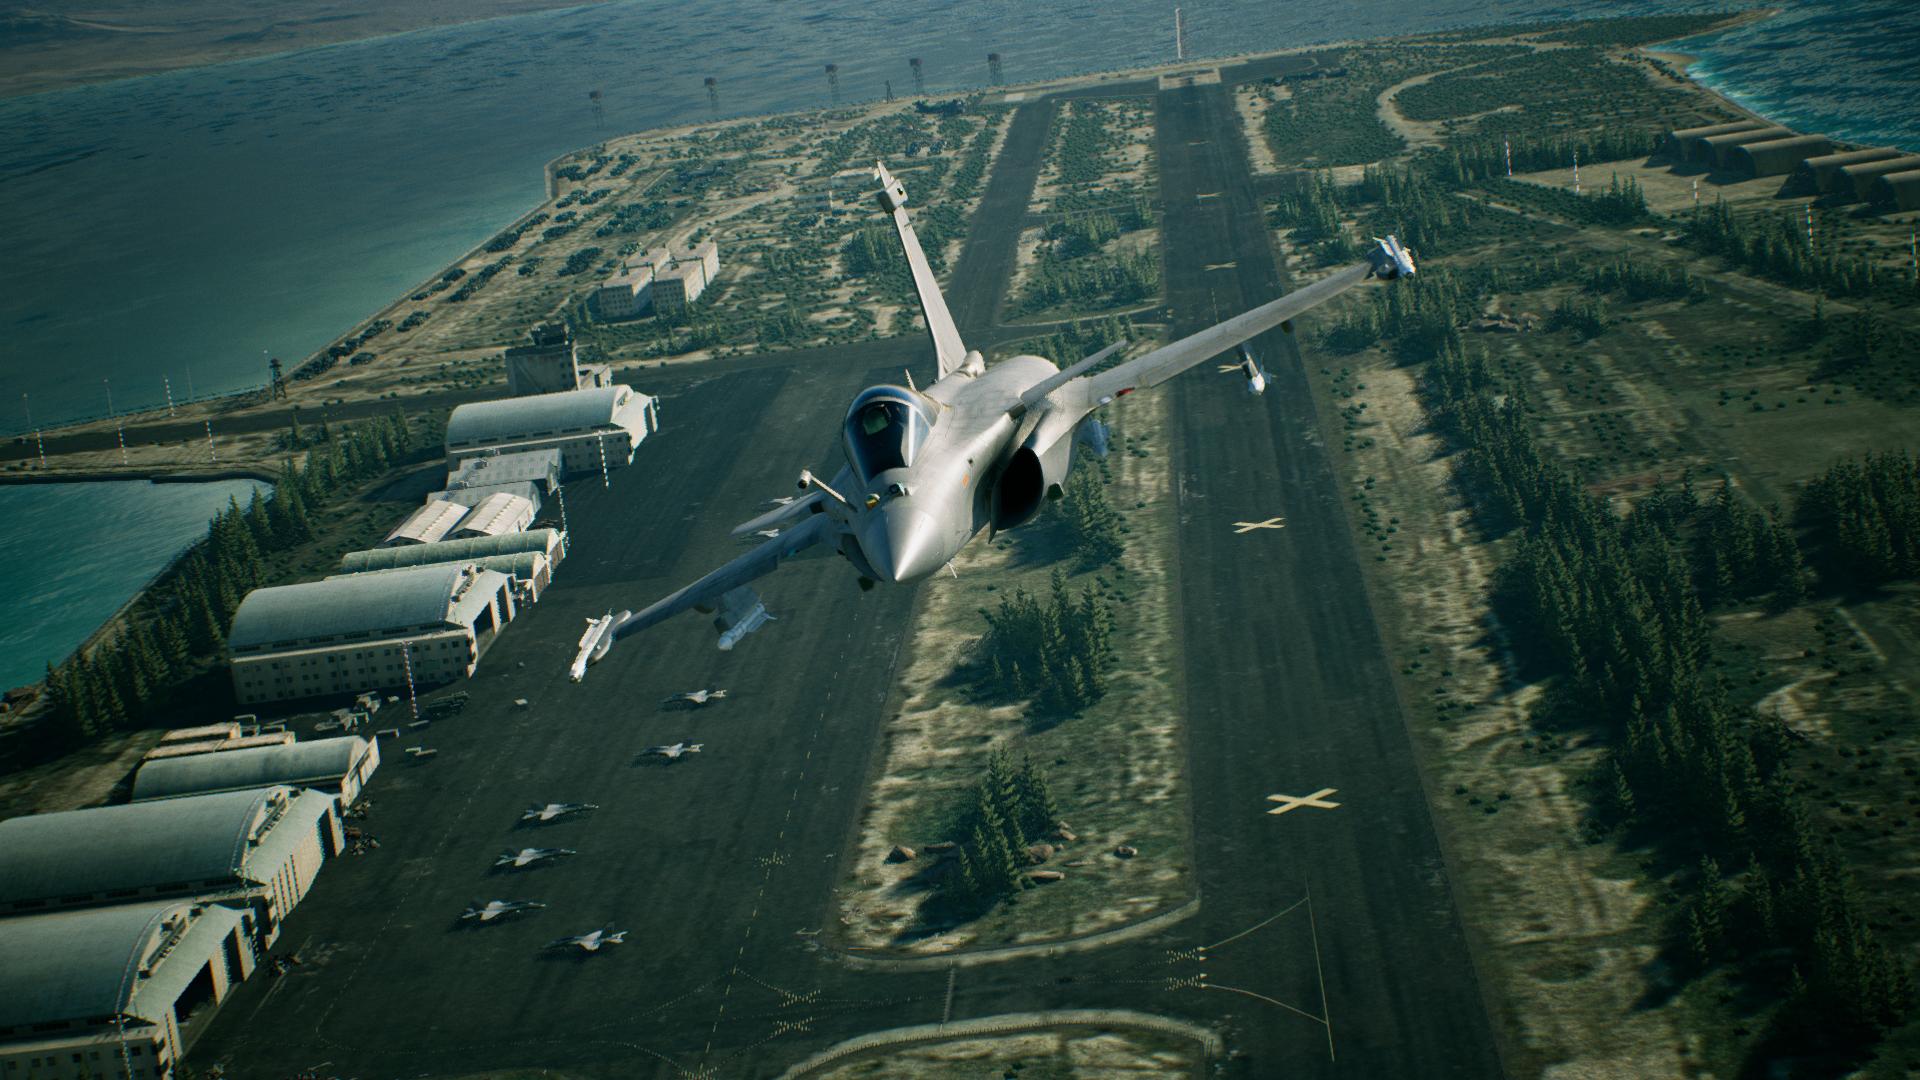 Screenshot №8 from game ACE COMBAT™ 7: SKIES UNKNOWN